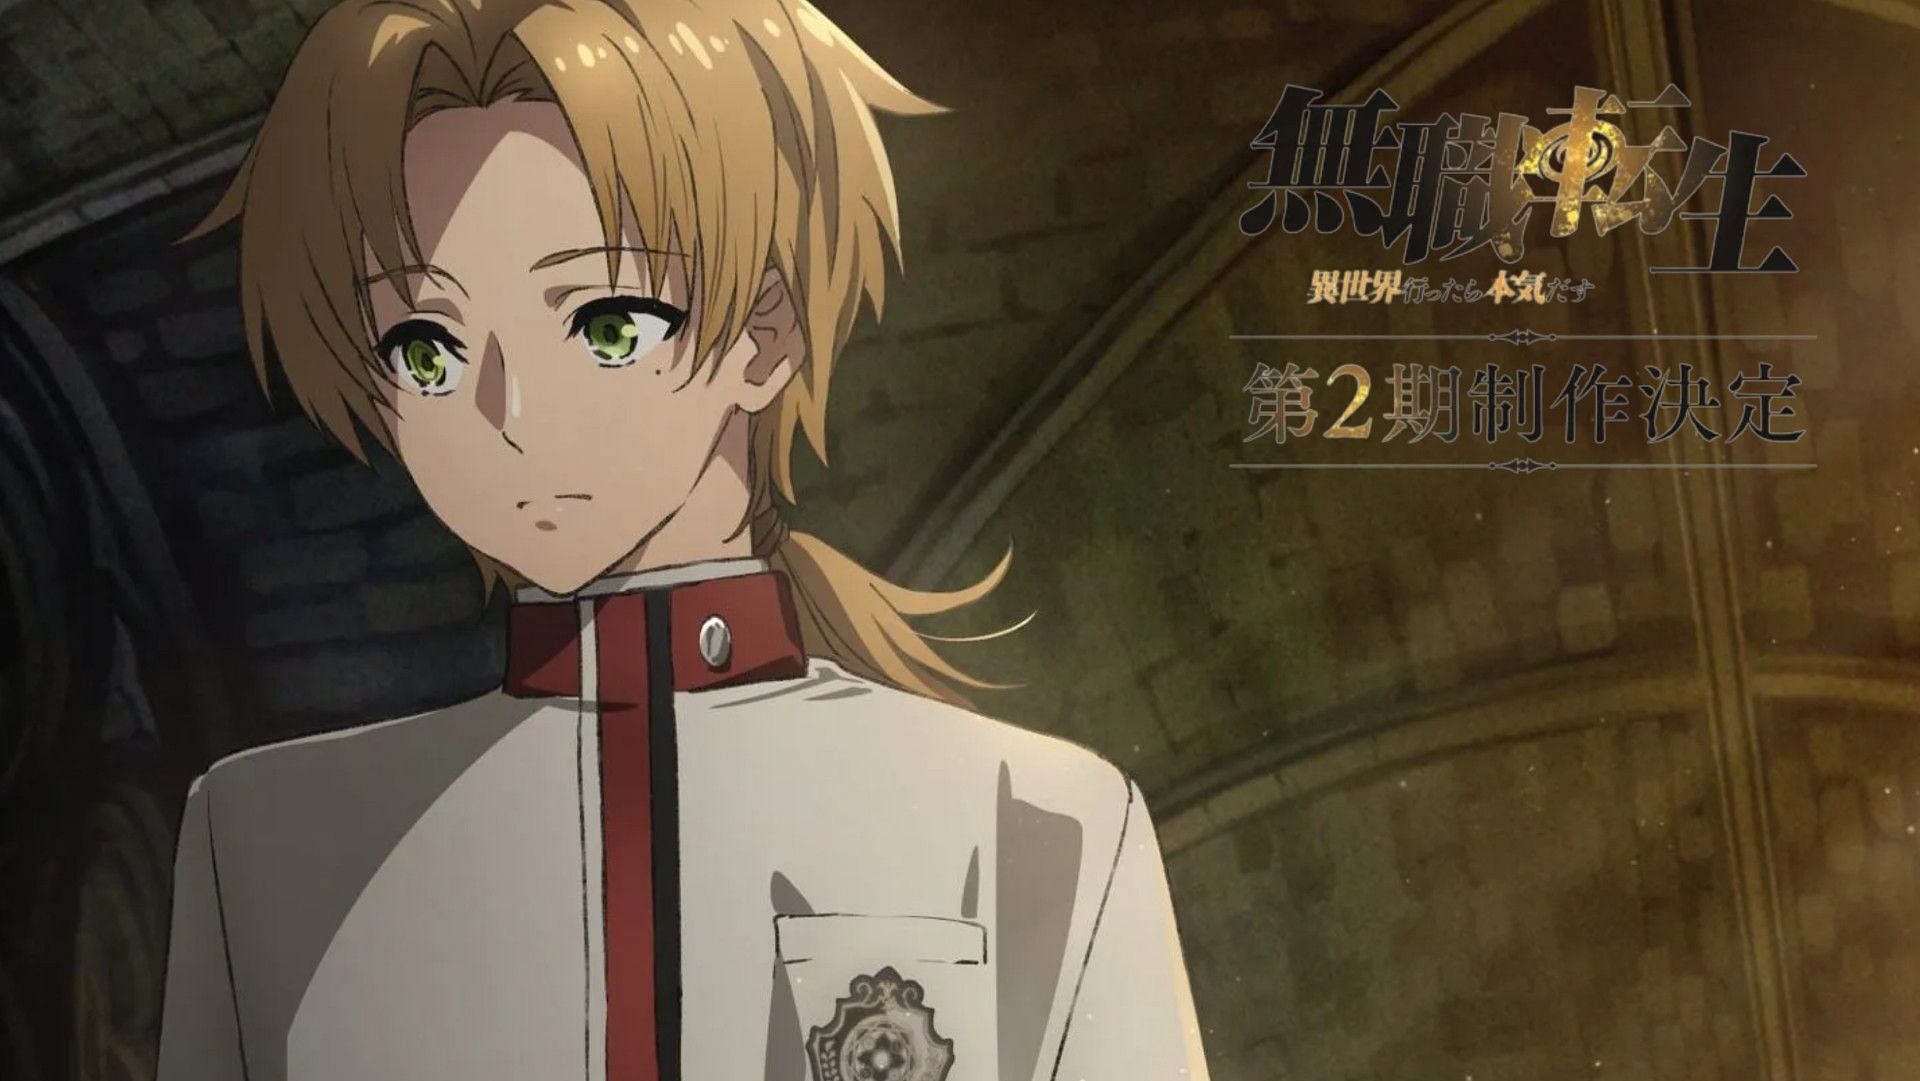 Mushoku Tensei: Jobless Reincarnation season 2 - Expected release date, where to watch, what to expect, and more